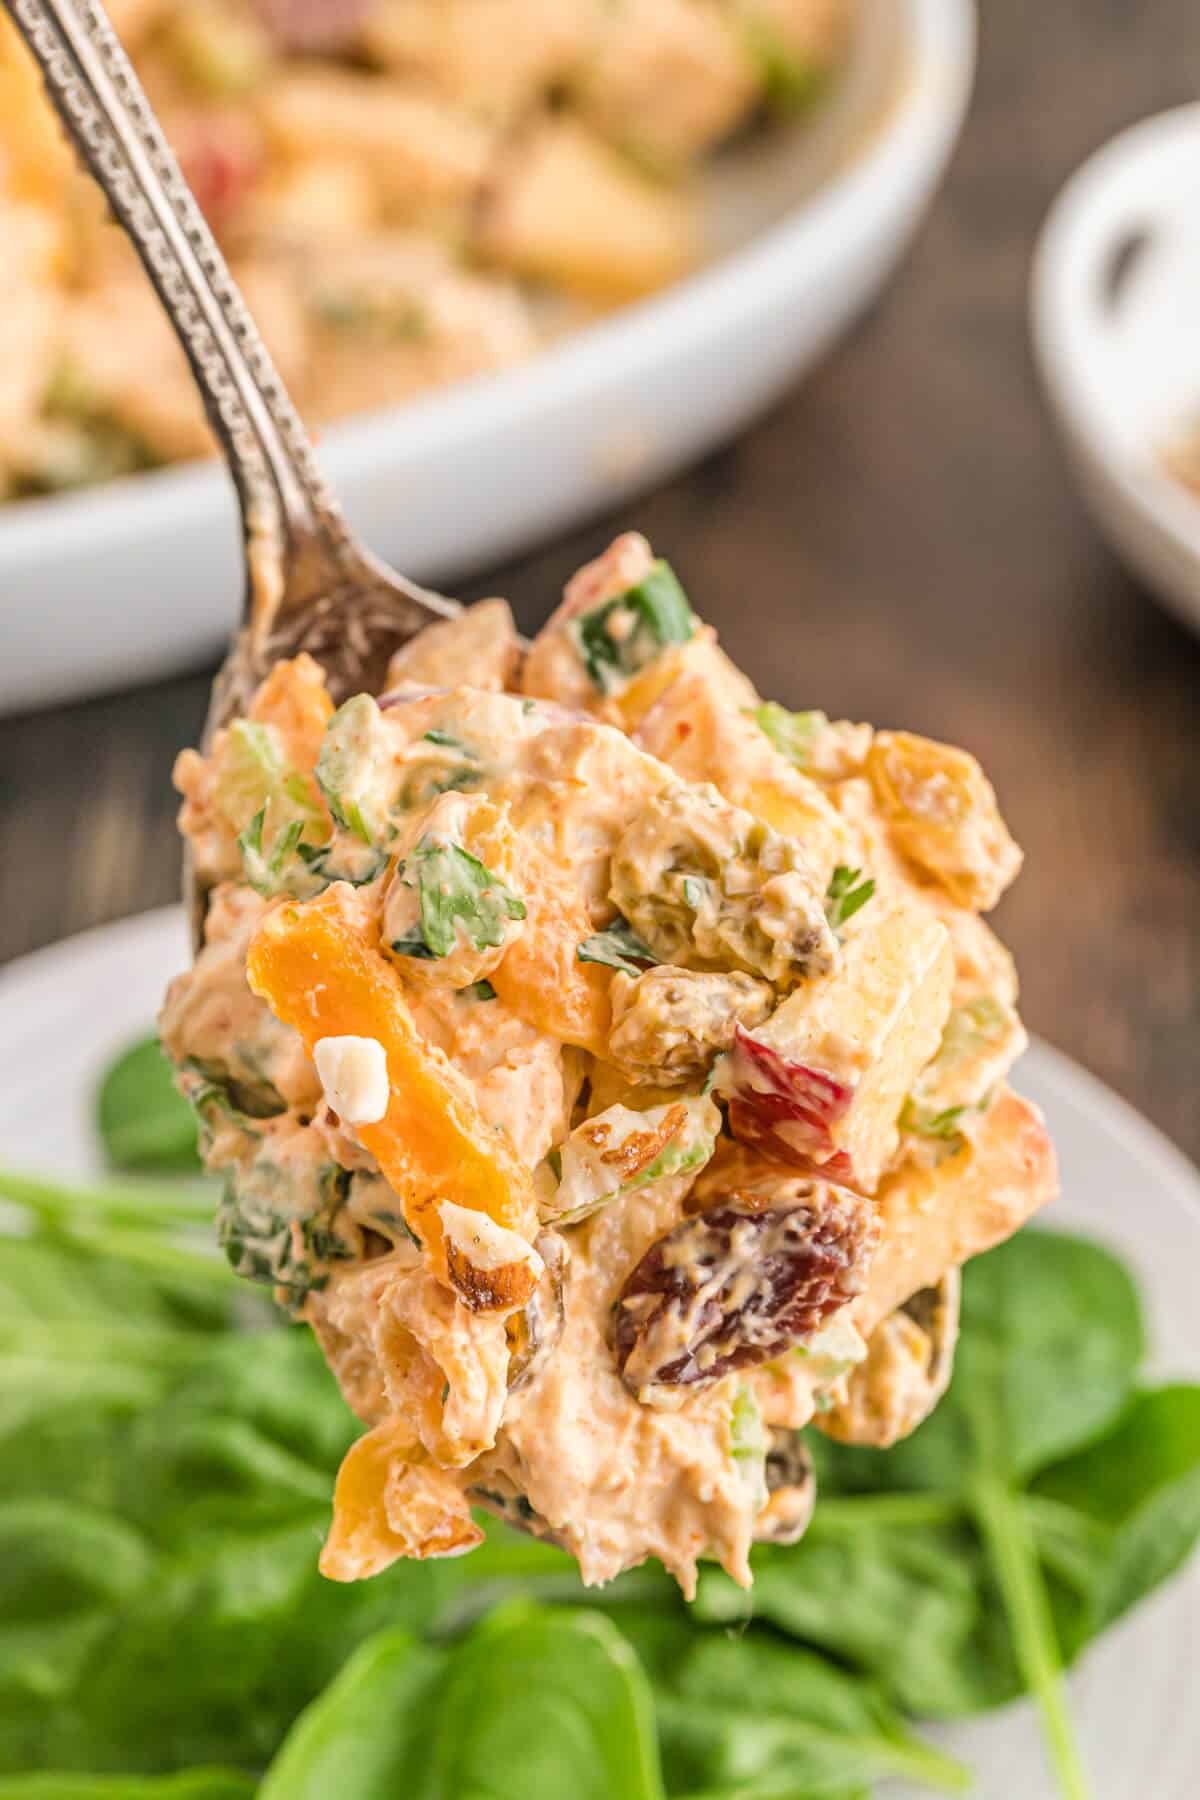 A serving spoon with Famous curried chicken salad on it.